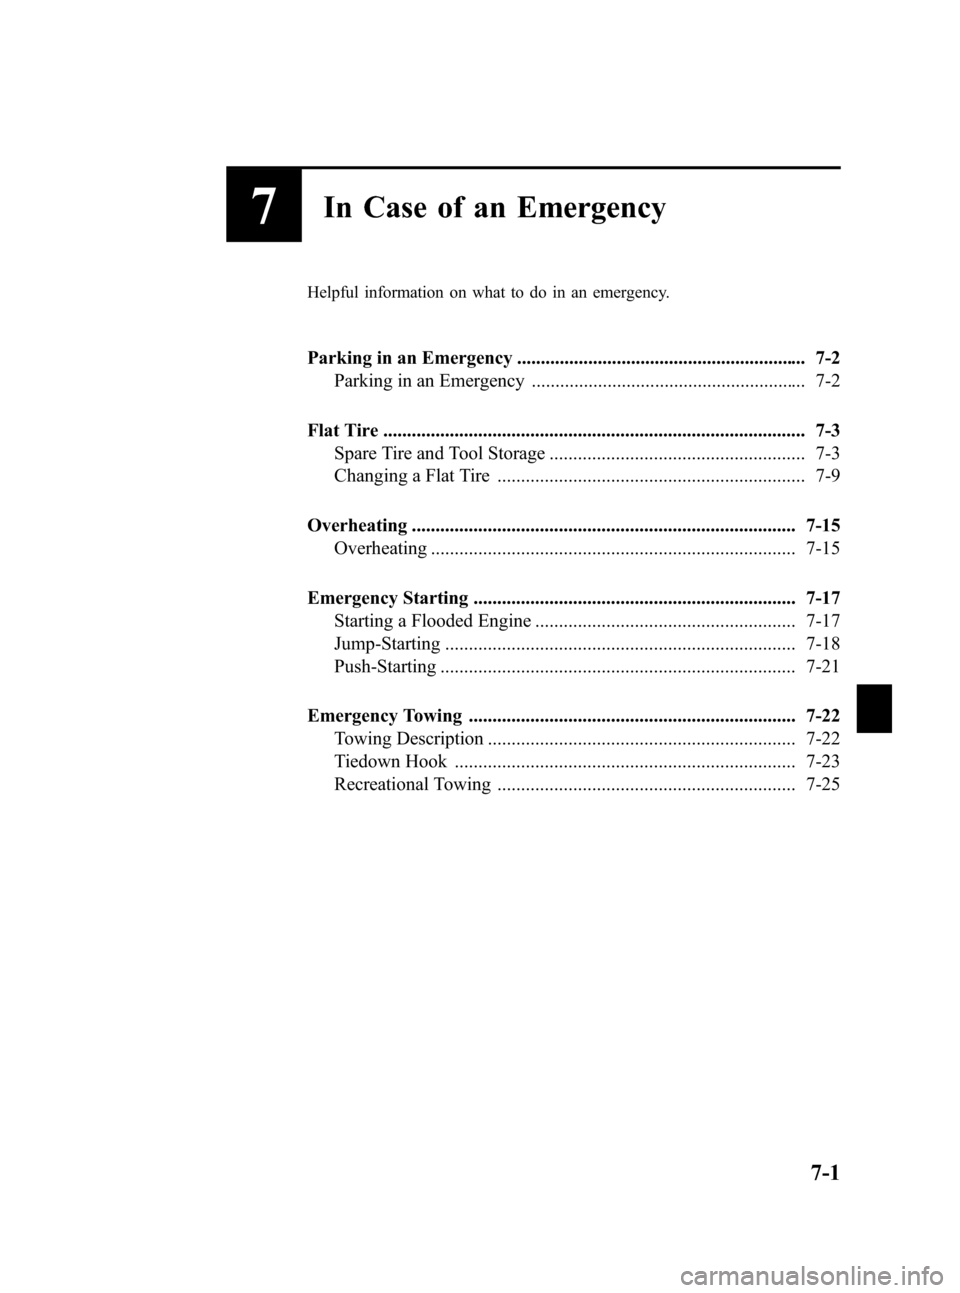 MAZDA MODEL 3 HATCHBACK 2010  Owners Manual (in English) Black plate (339,1)
7In Case of an Emergency
Helpful information on what to do in an emergency.
Parking in an Emergency ............................................................. 7-2
Parking in an 